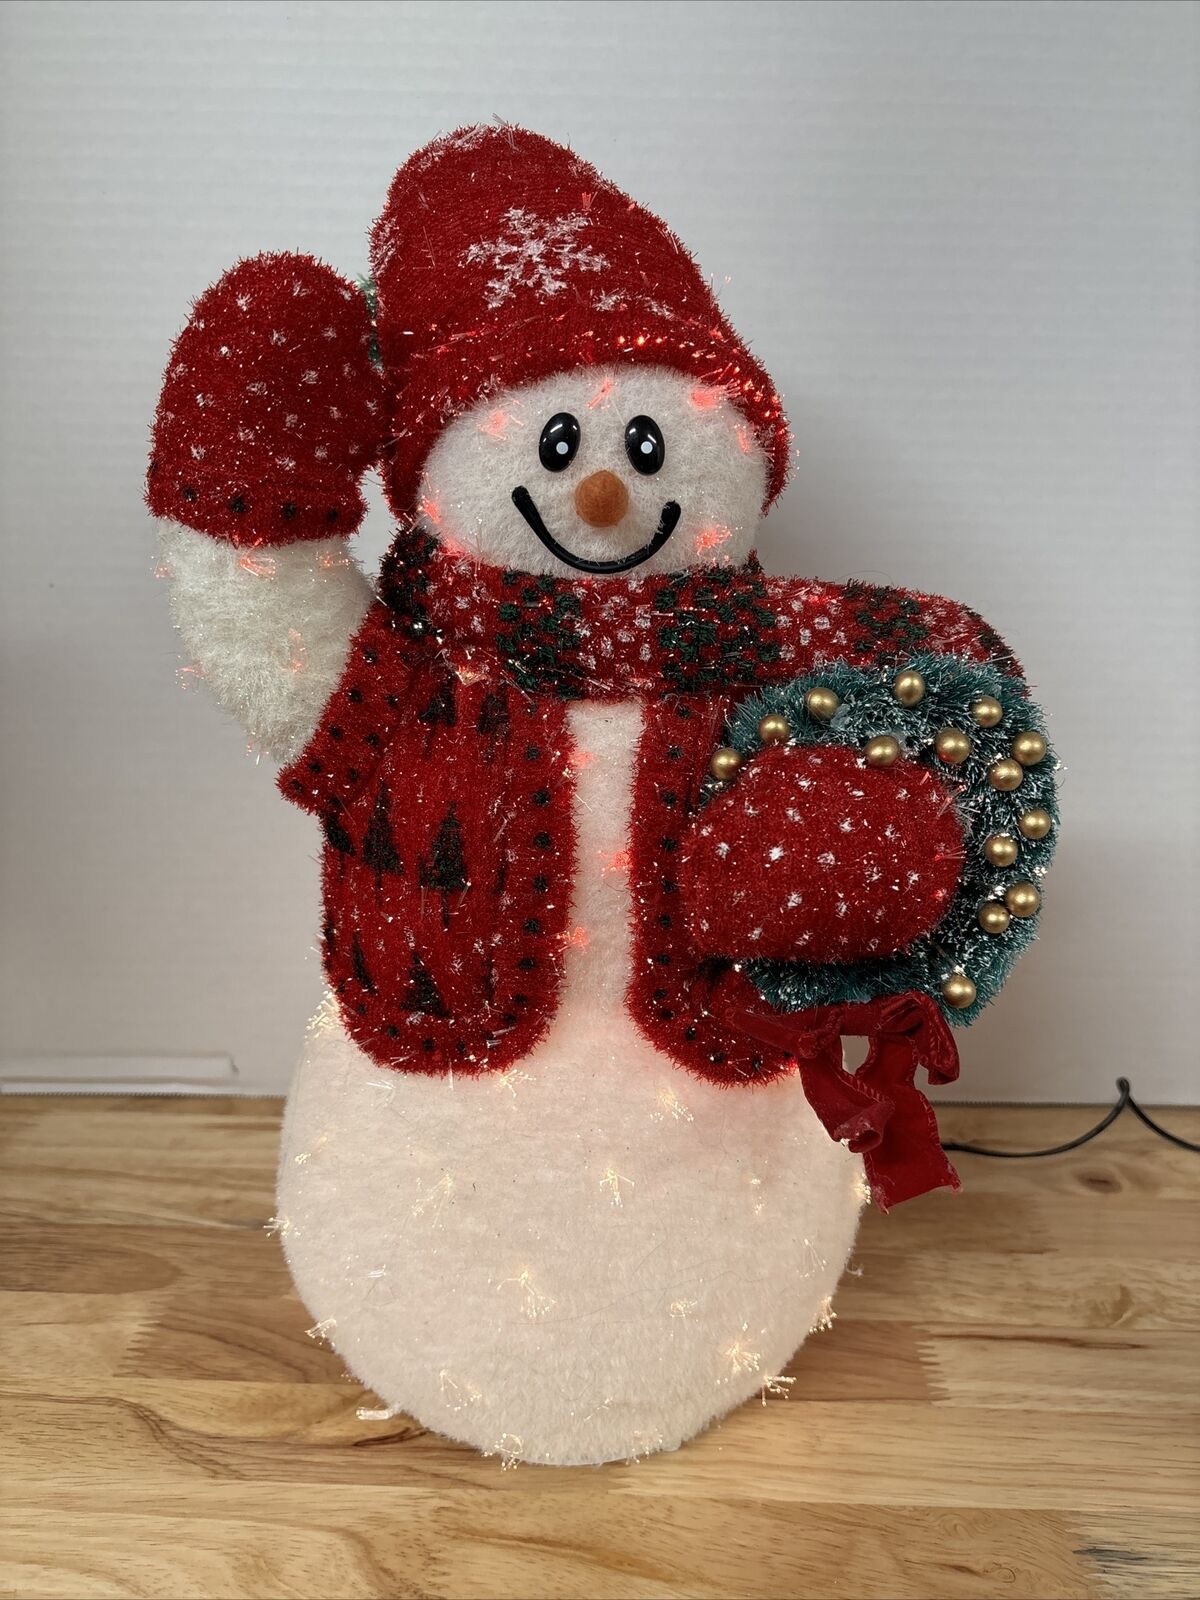 2002 Avon Fiber Optic Color Changing Snowman 16" Tall Tested & Works